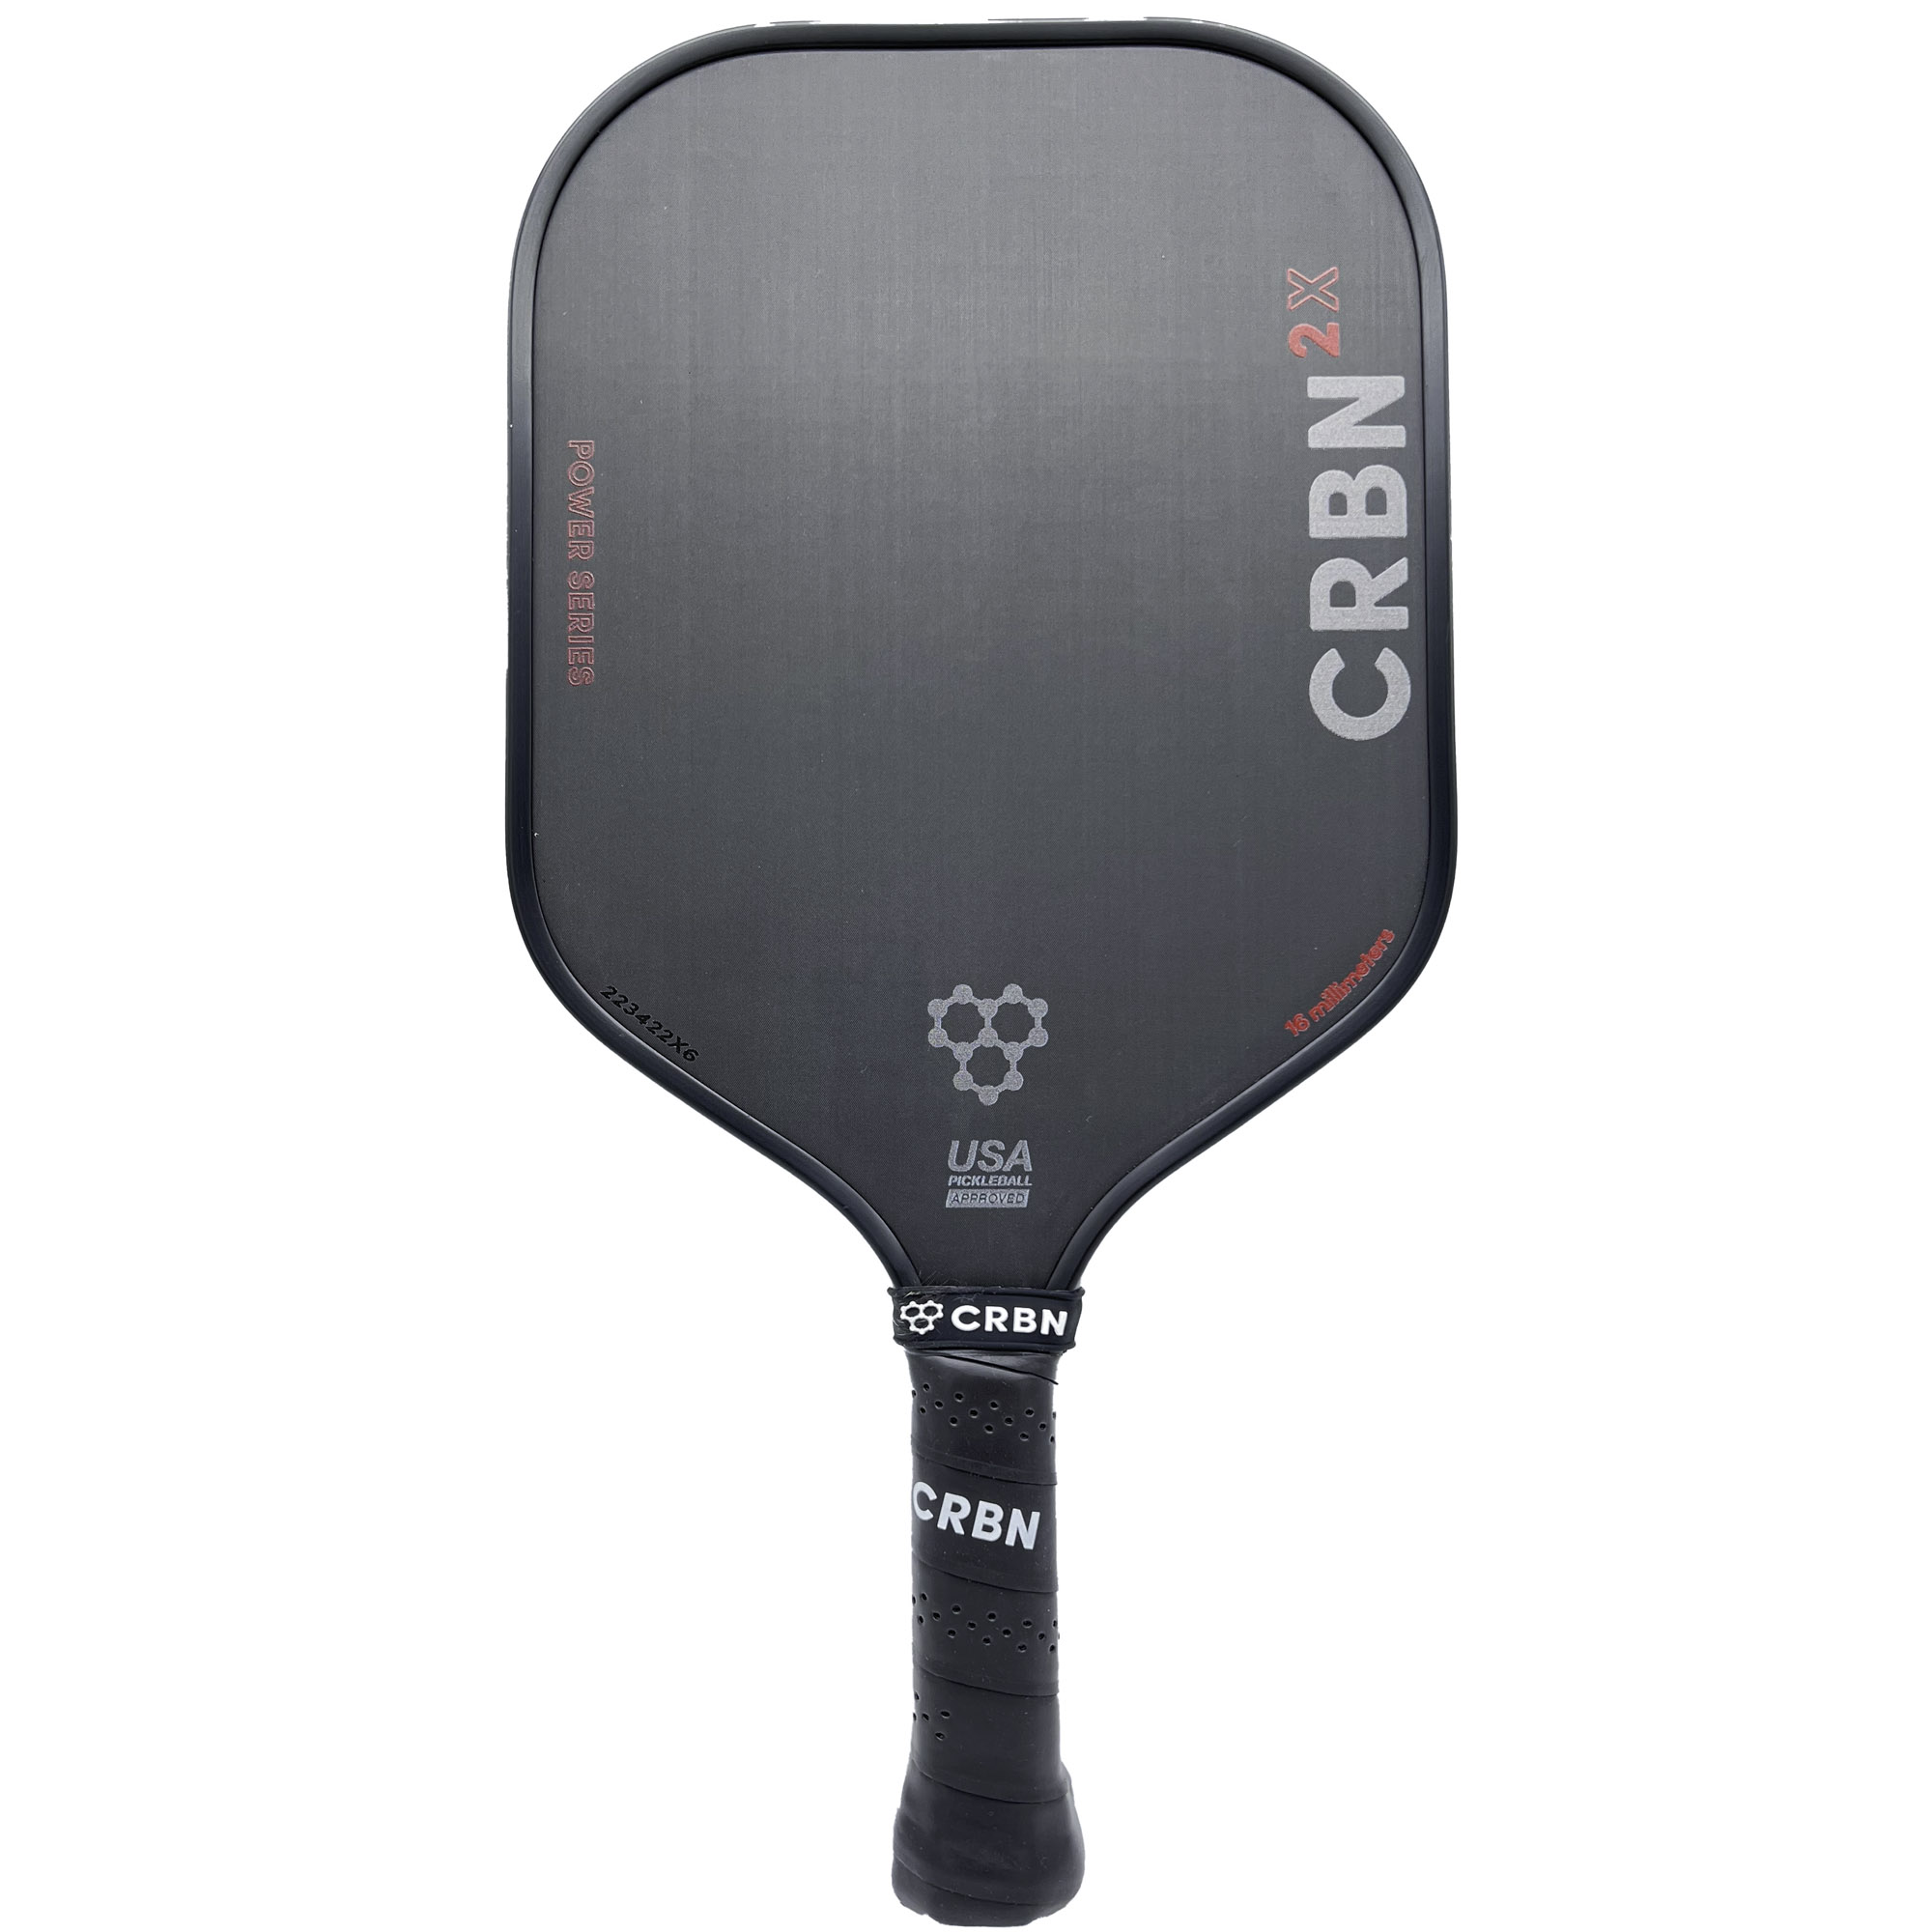 CRBN Power series paddle